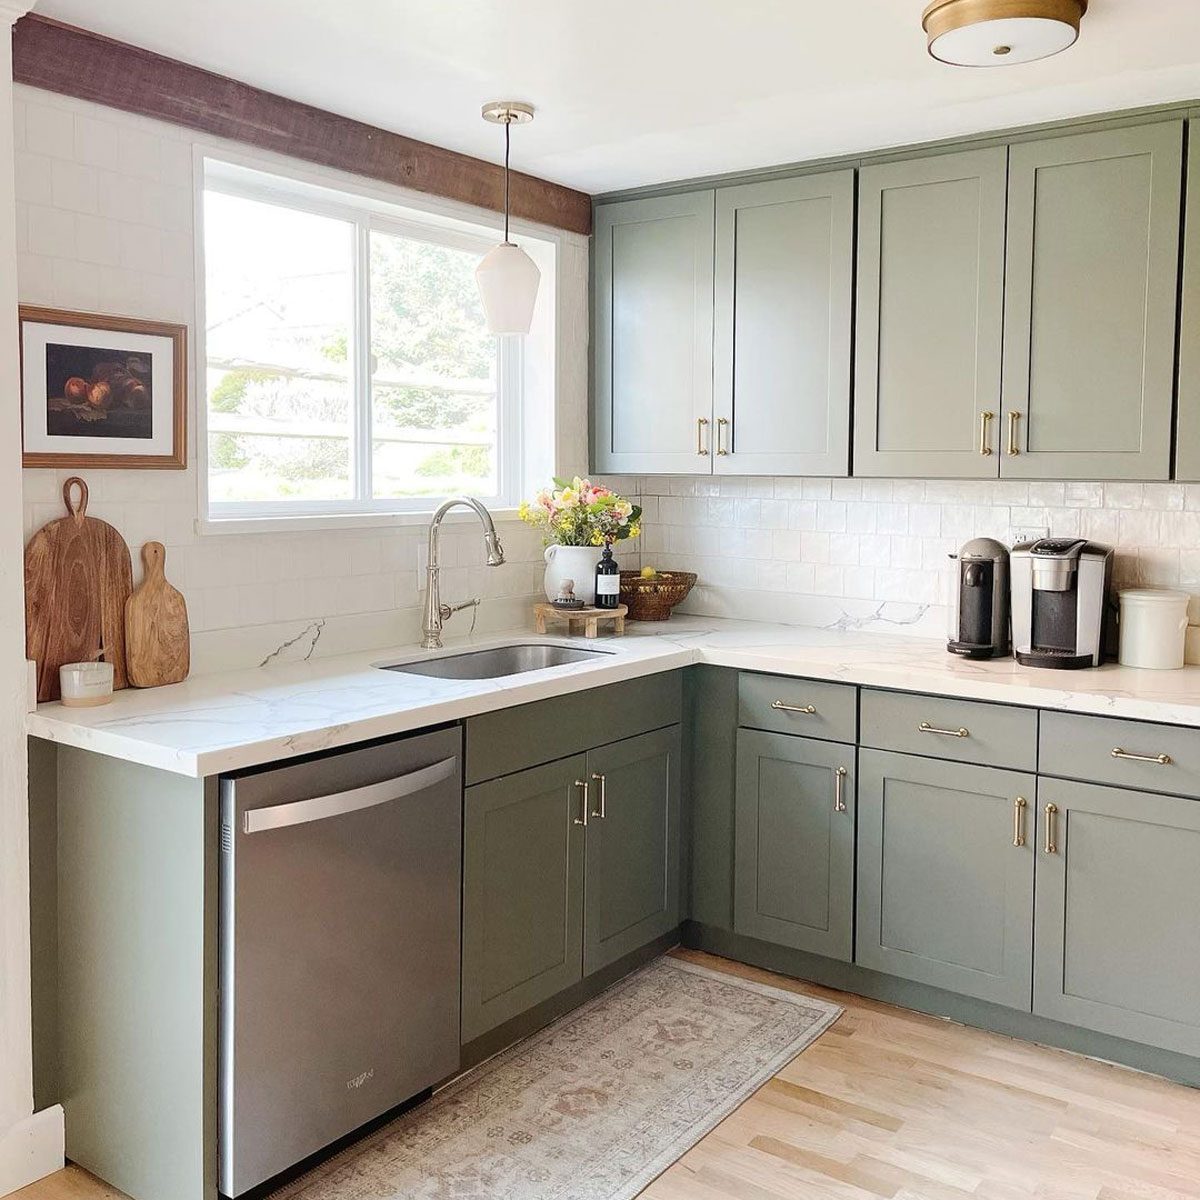 12 Kitchen Color Trends That Are Hot Right Now | The Family Handyman